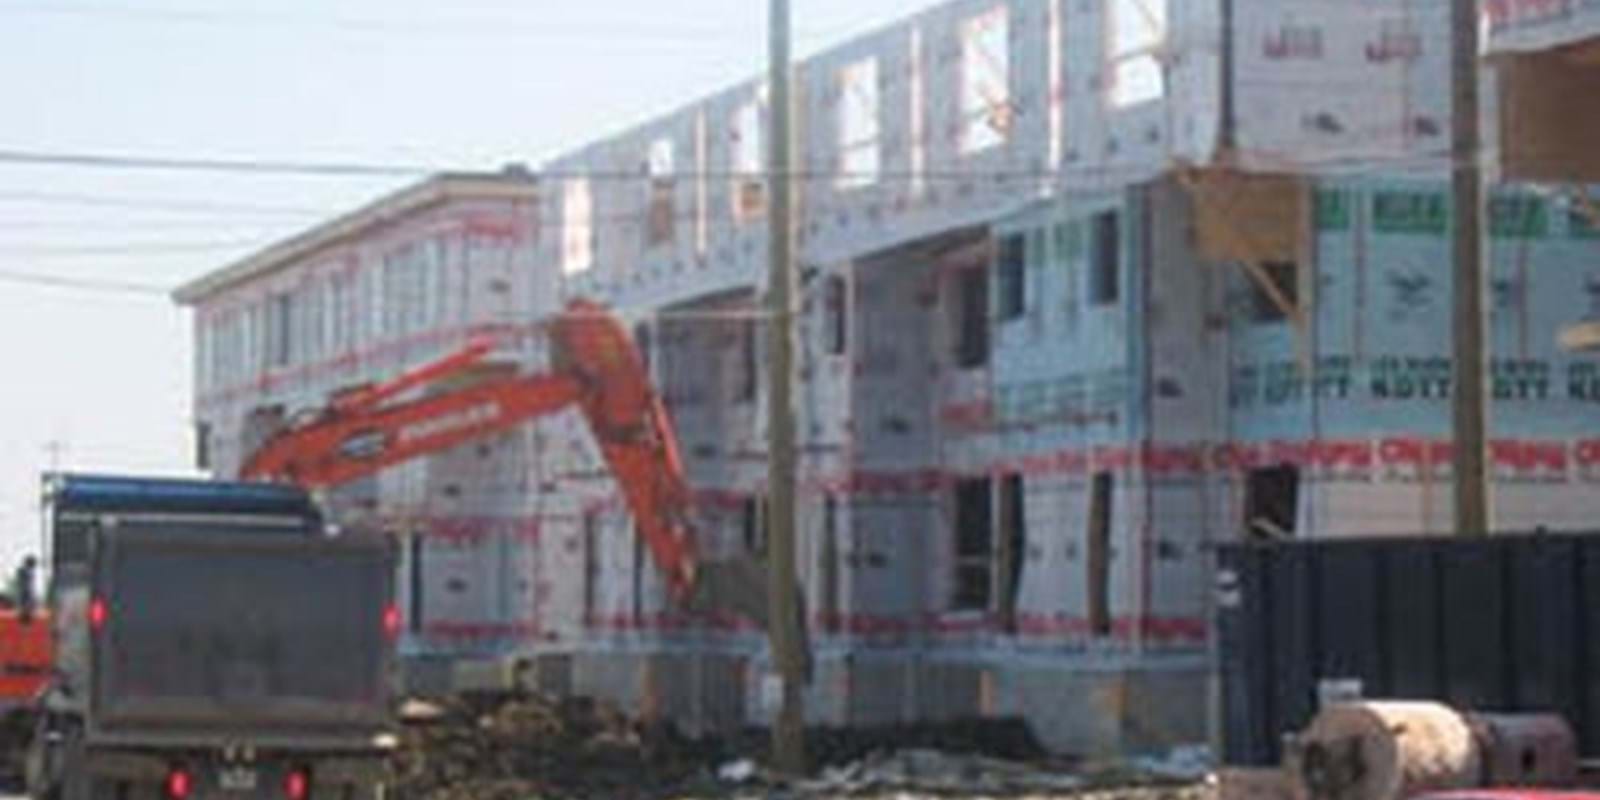 Quebec stays on course by increasing even more its new construction sites